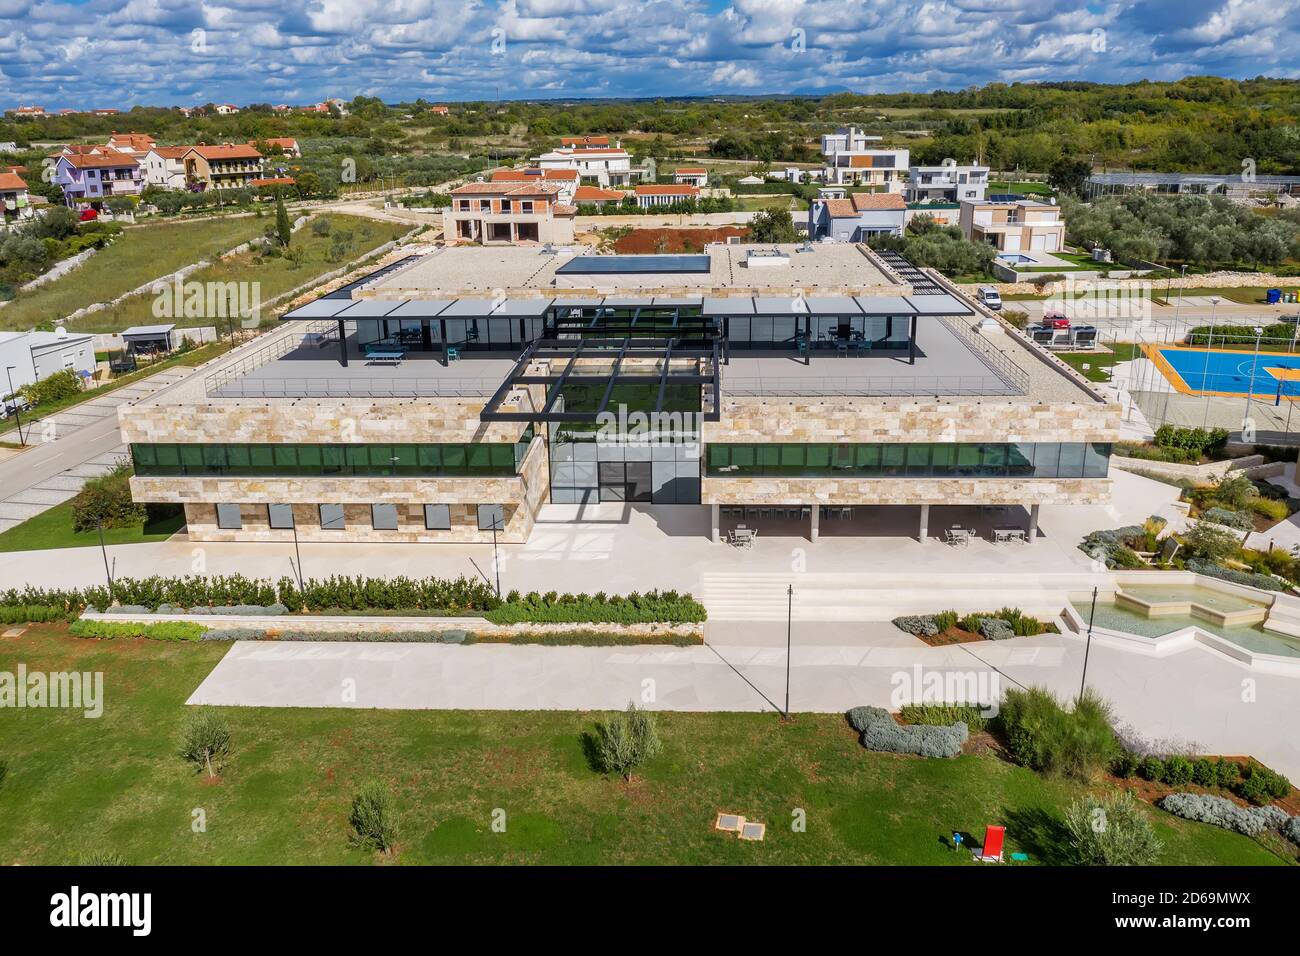 VODNJAN, CROATIA - OCTOBER 6, 2020 - The modern campus of the global IT company Infobip with all the accompanying facilities, aerial view Stock Photo